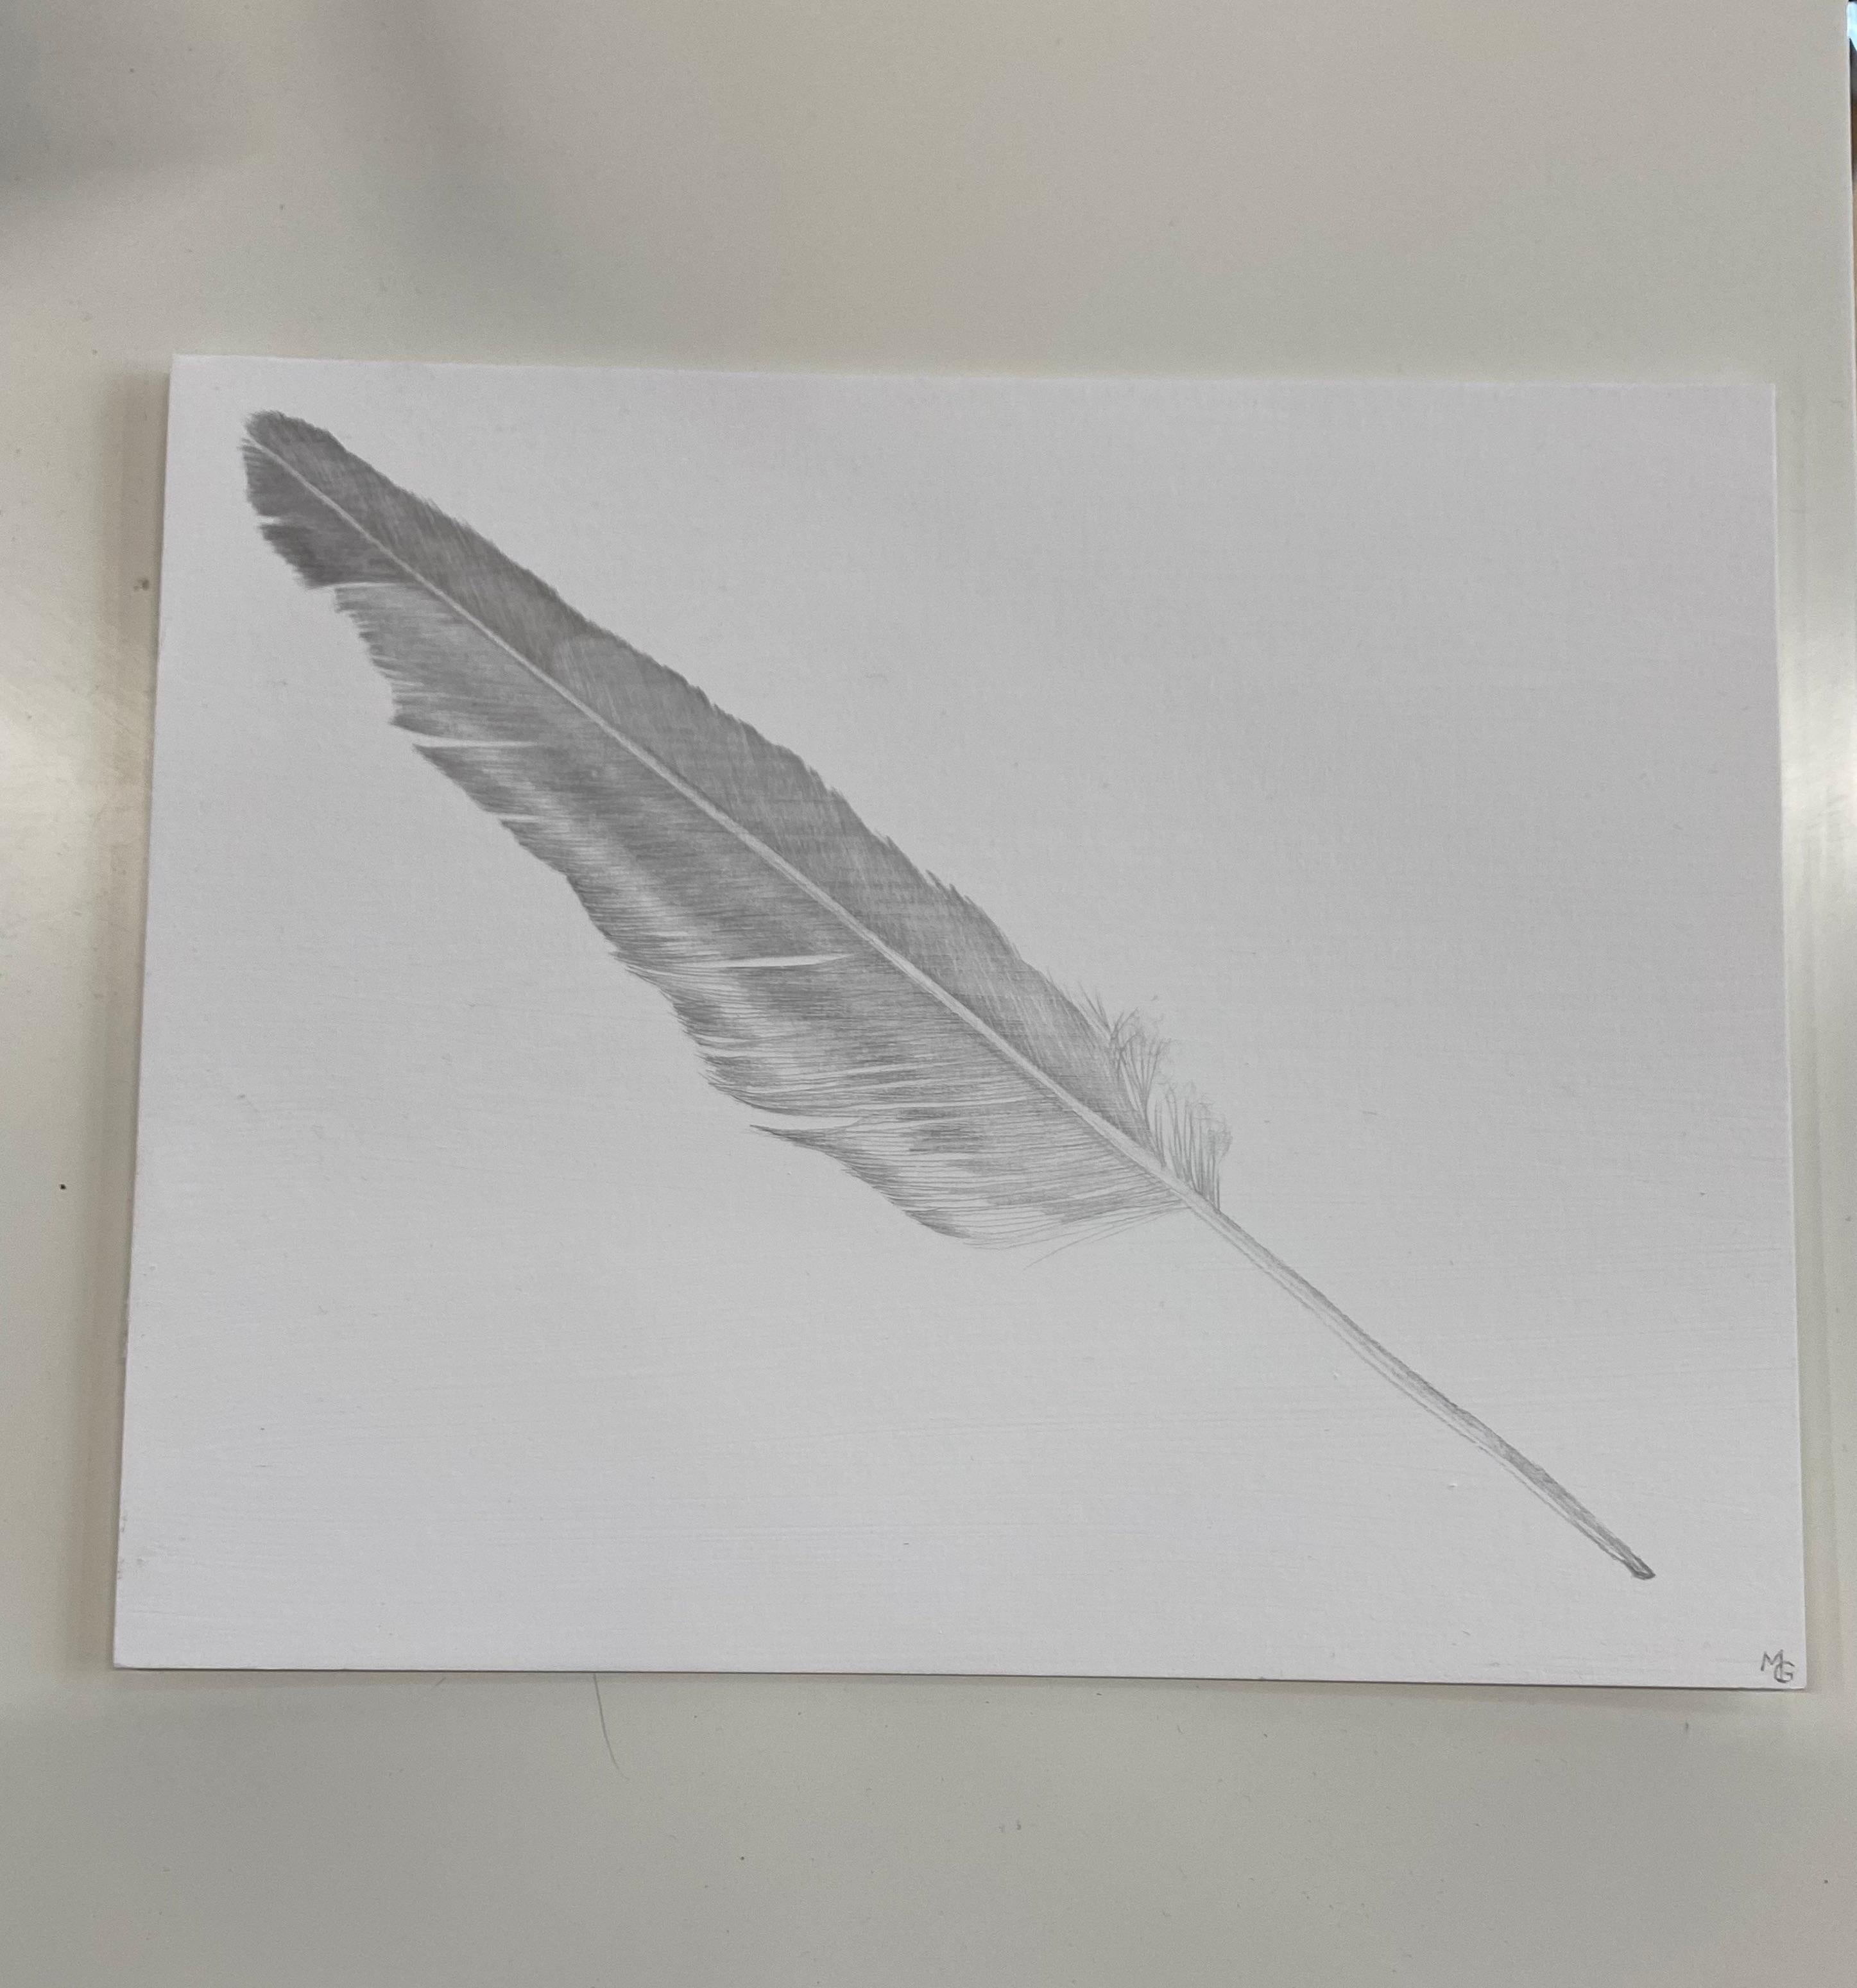 Seagull Feather, Silverpoint Drawing of Bird's Feather in Soft Gray on White - Art by Margot Glass